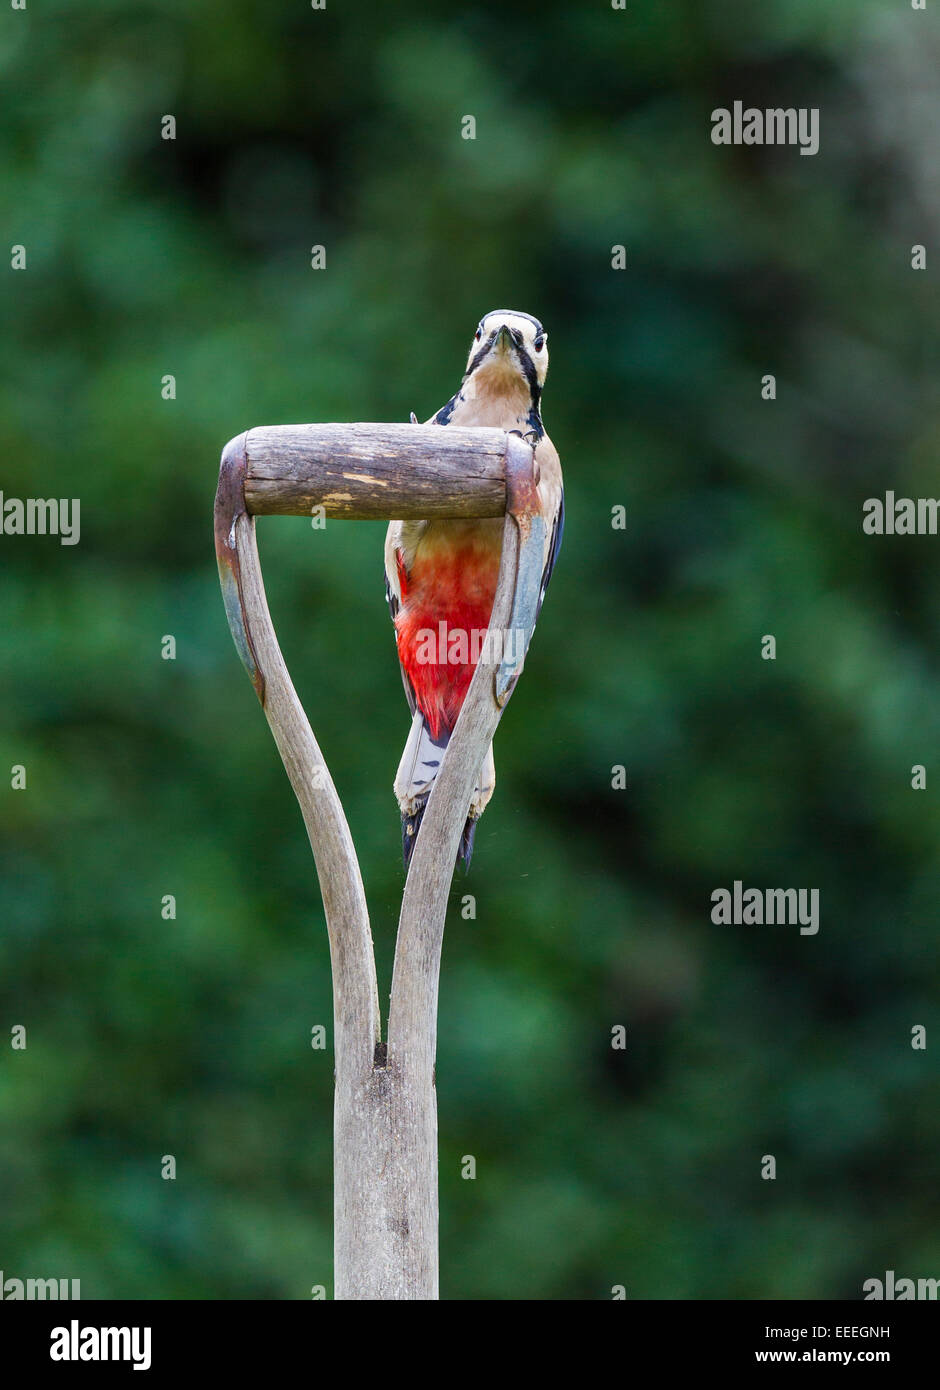 Greater Spotted Woodpecker on a garden fork. Stock Photo